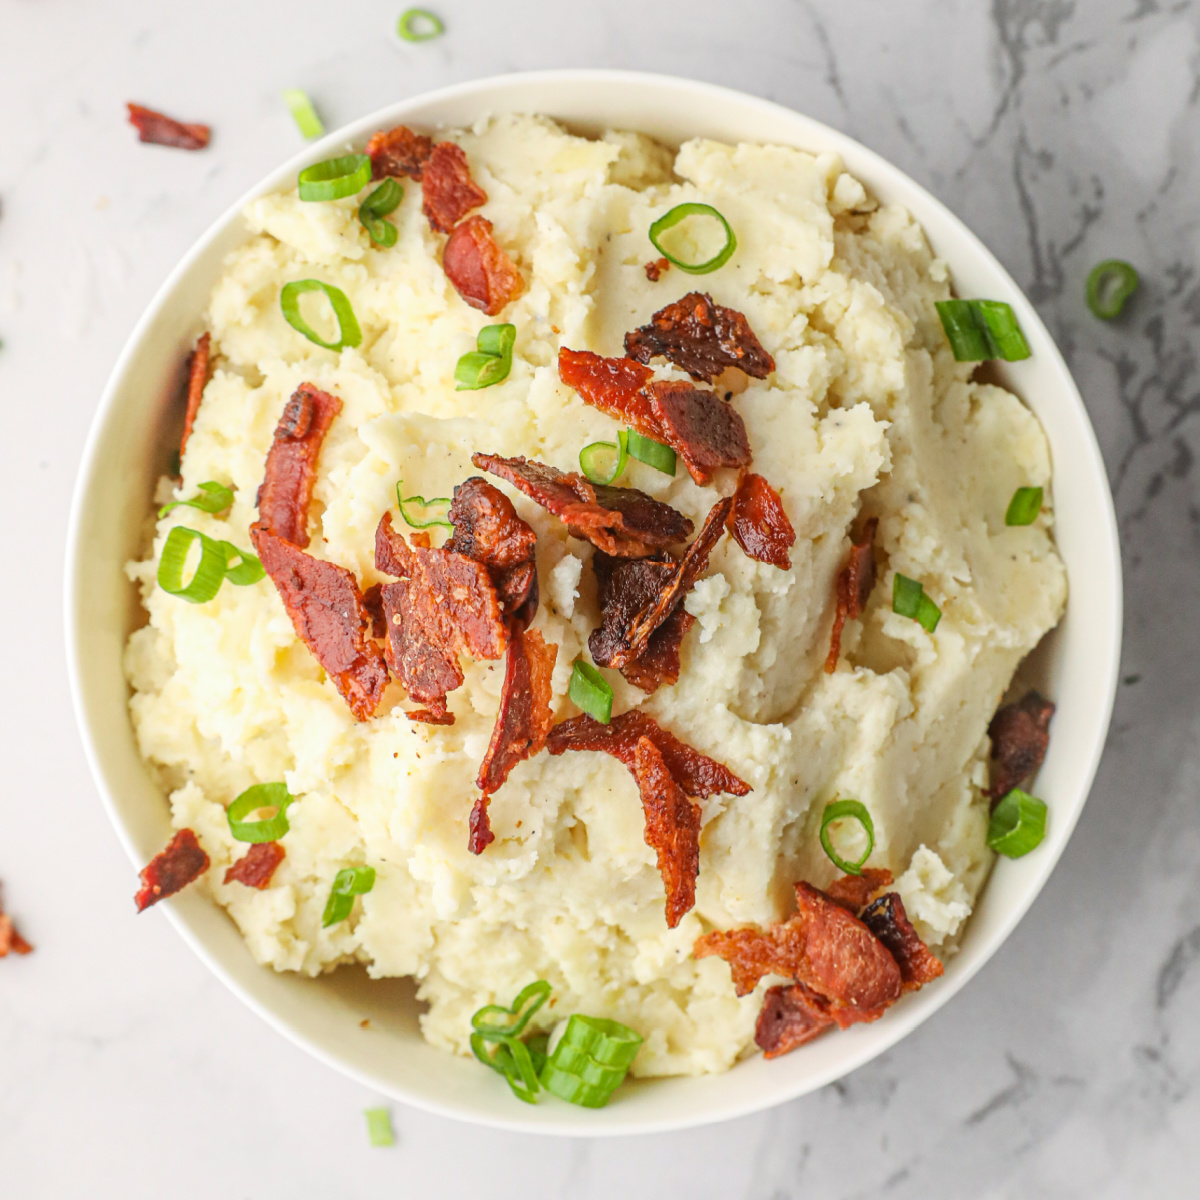 Horseradish Smoked Potatoes in a white bowl garnished with crumbled bacon and chopped green onions.